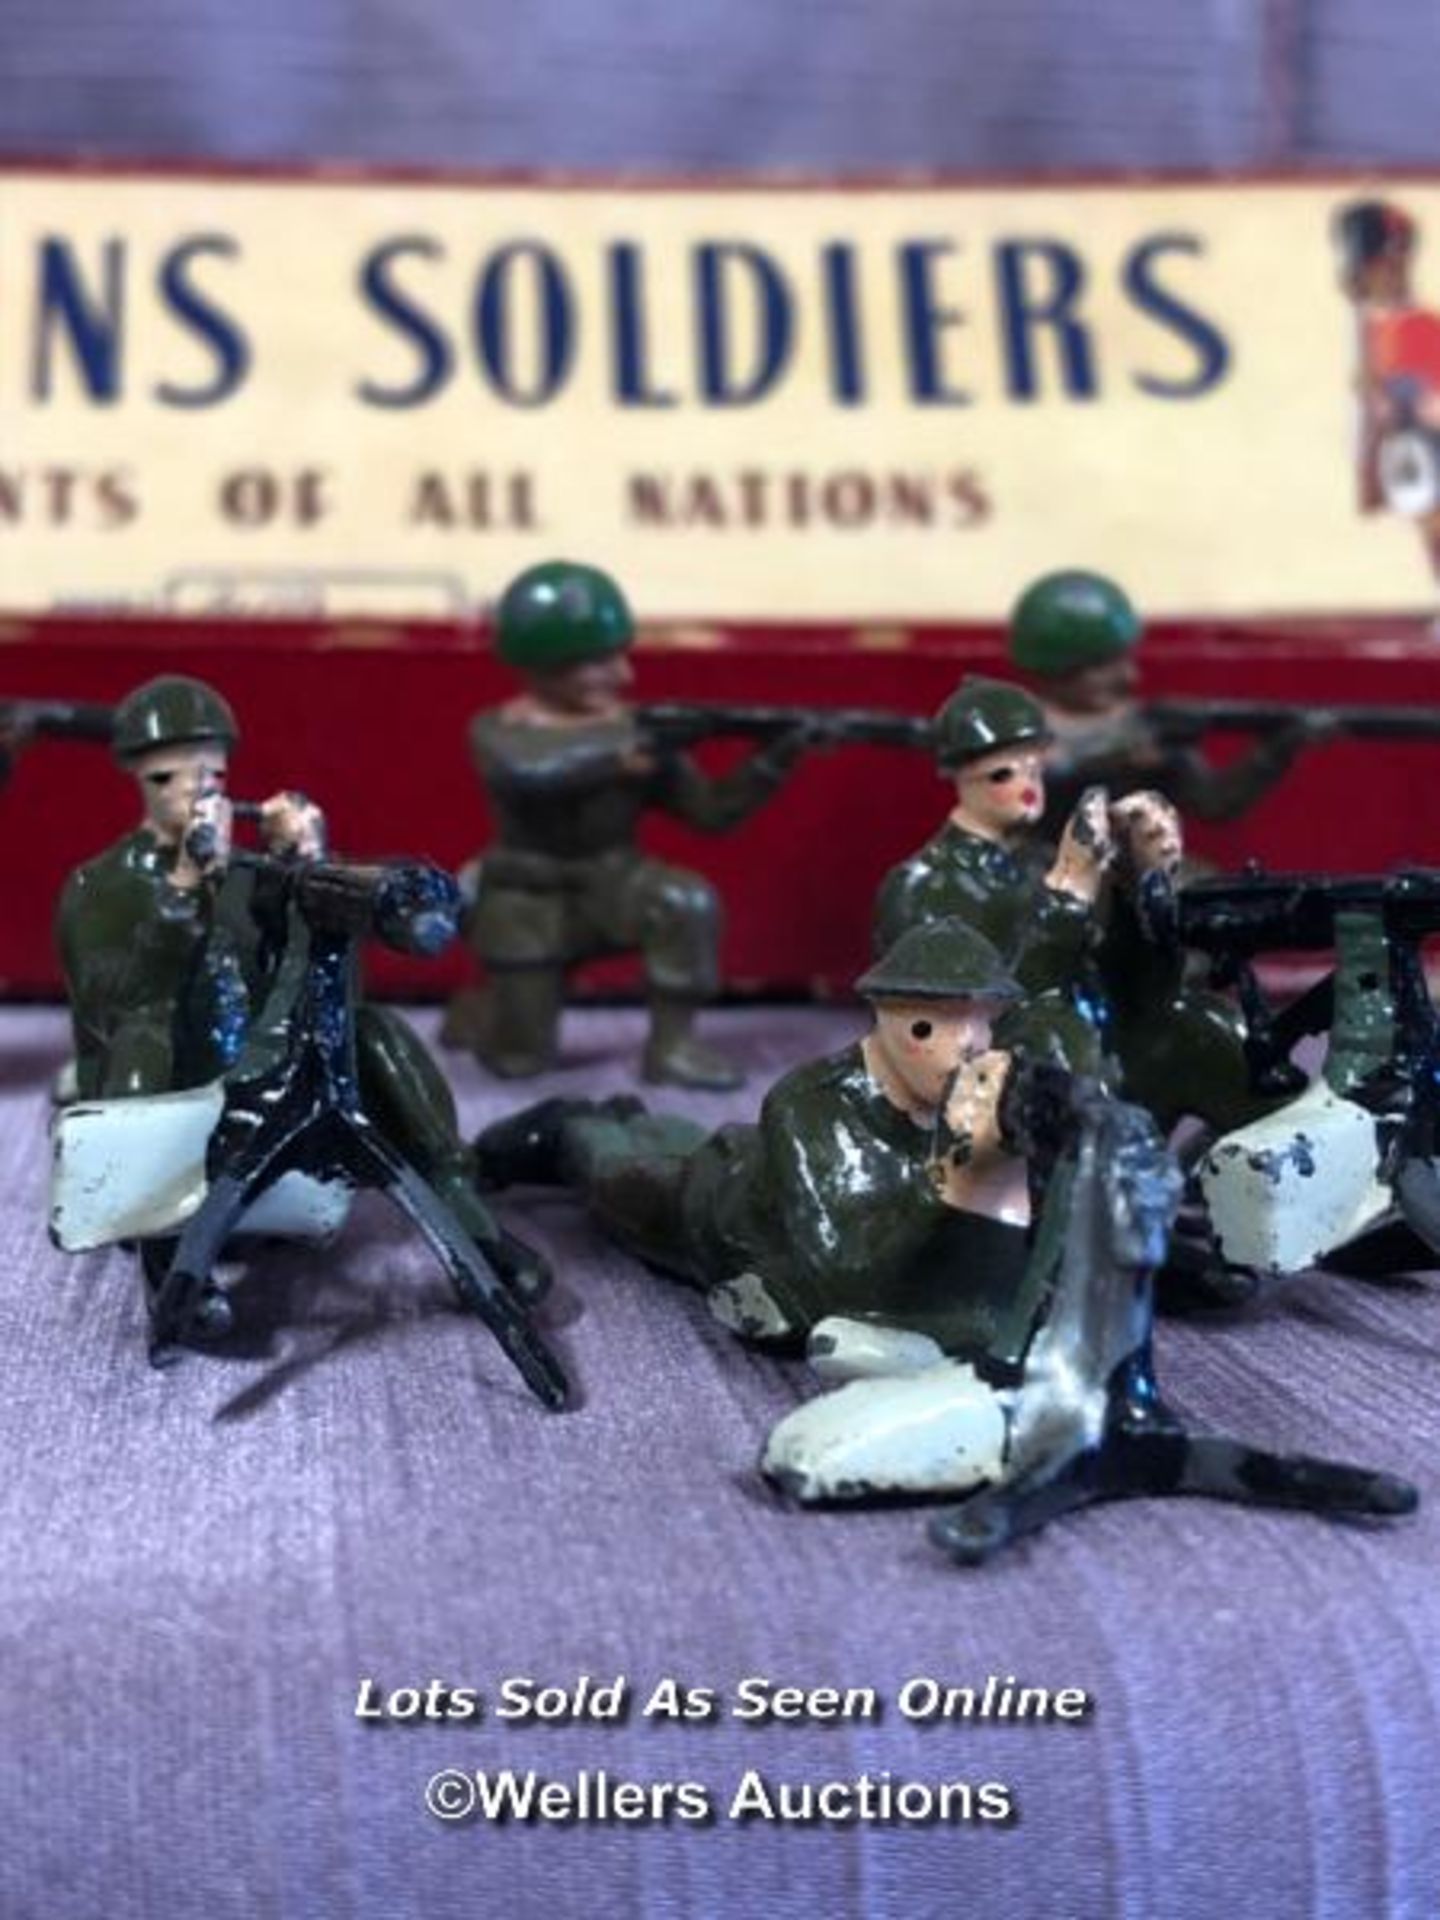 BRITAINS SOLDIERS REGIMENTS OF ALL NATIONS, WITH A NON MATCHING BOX NO. 2063 THE ARGYLL AND - Bild 4 aus 6